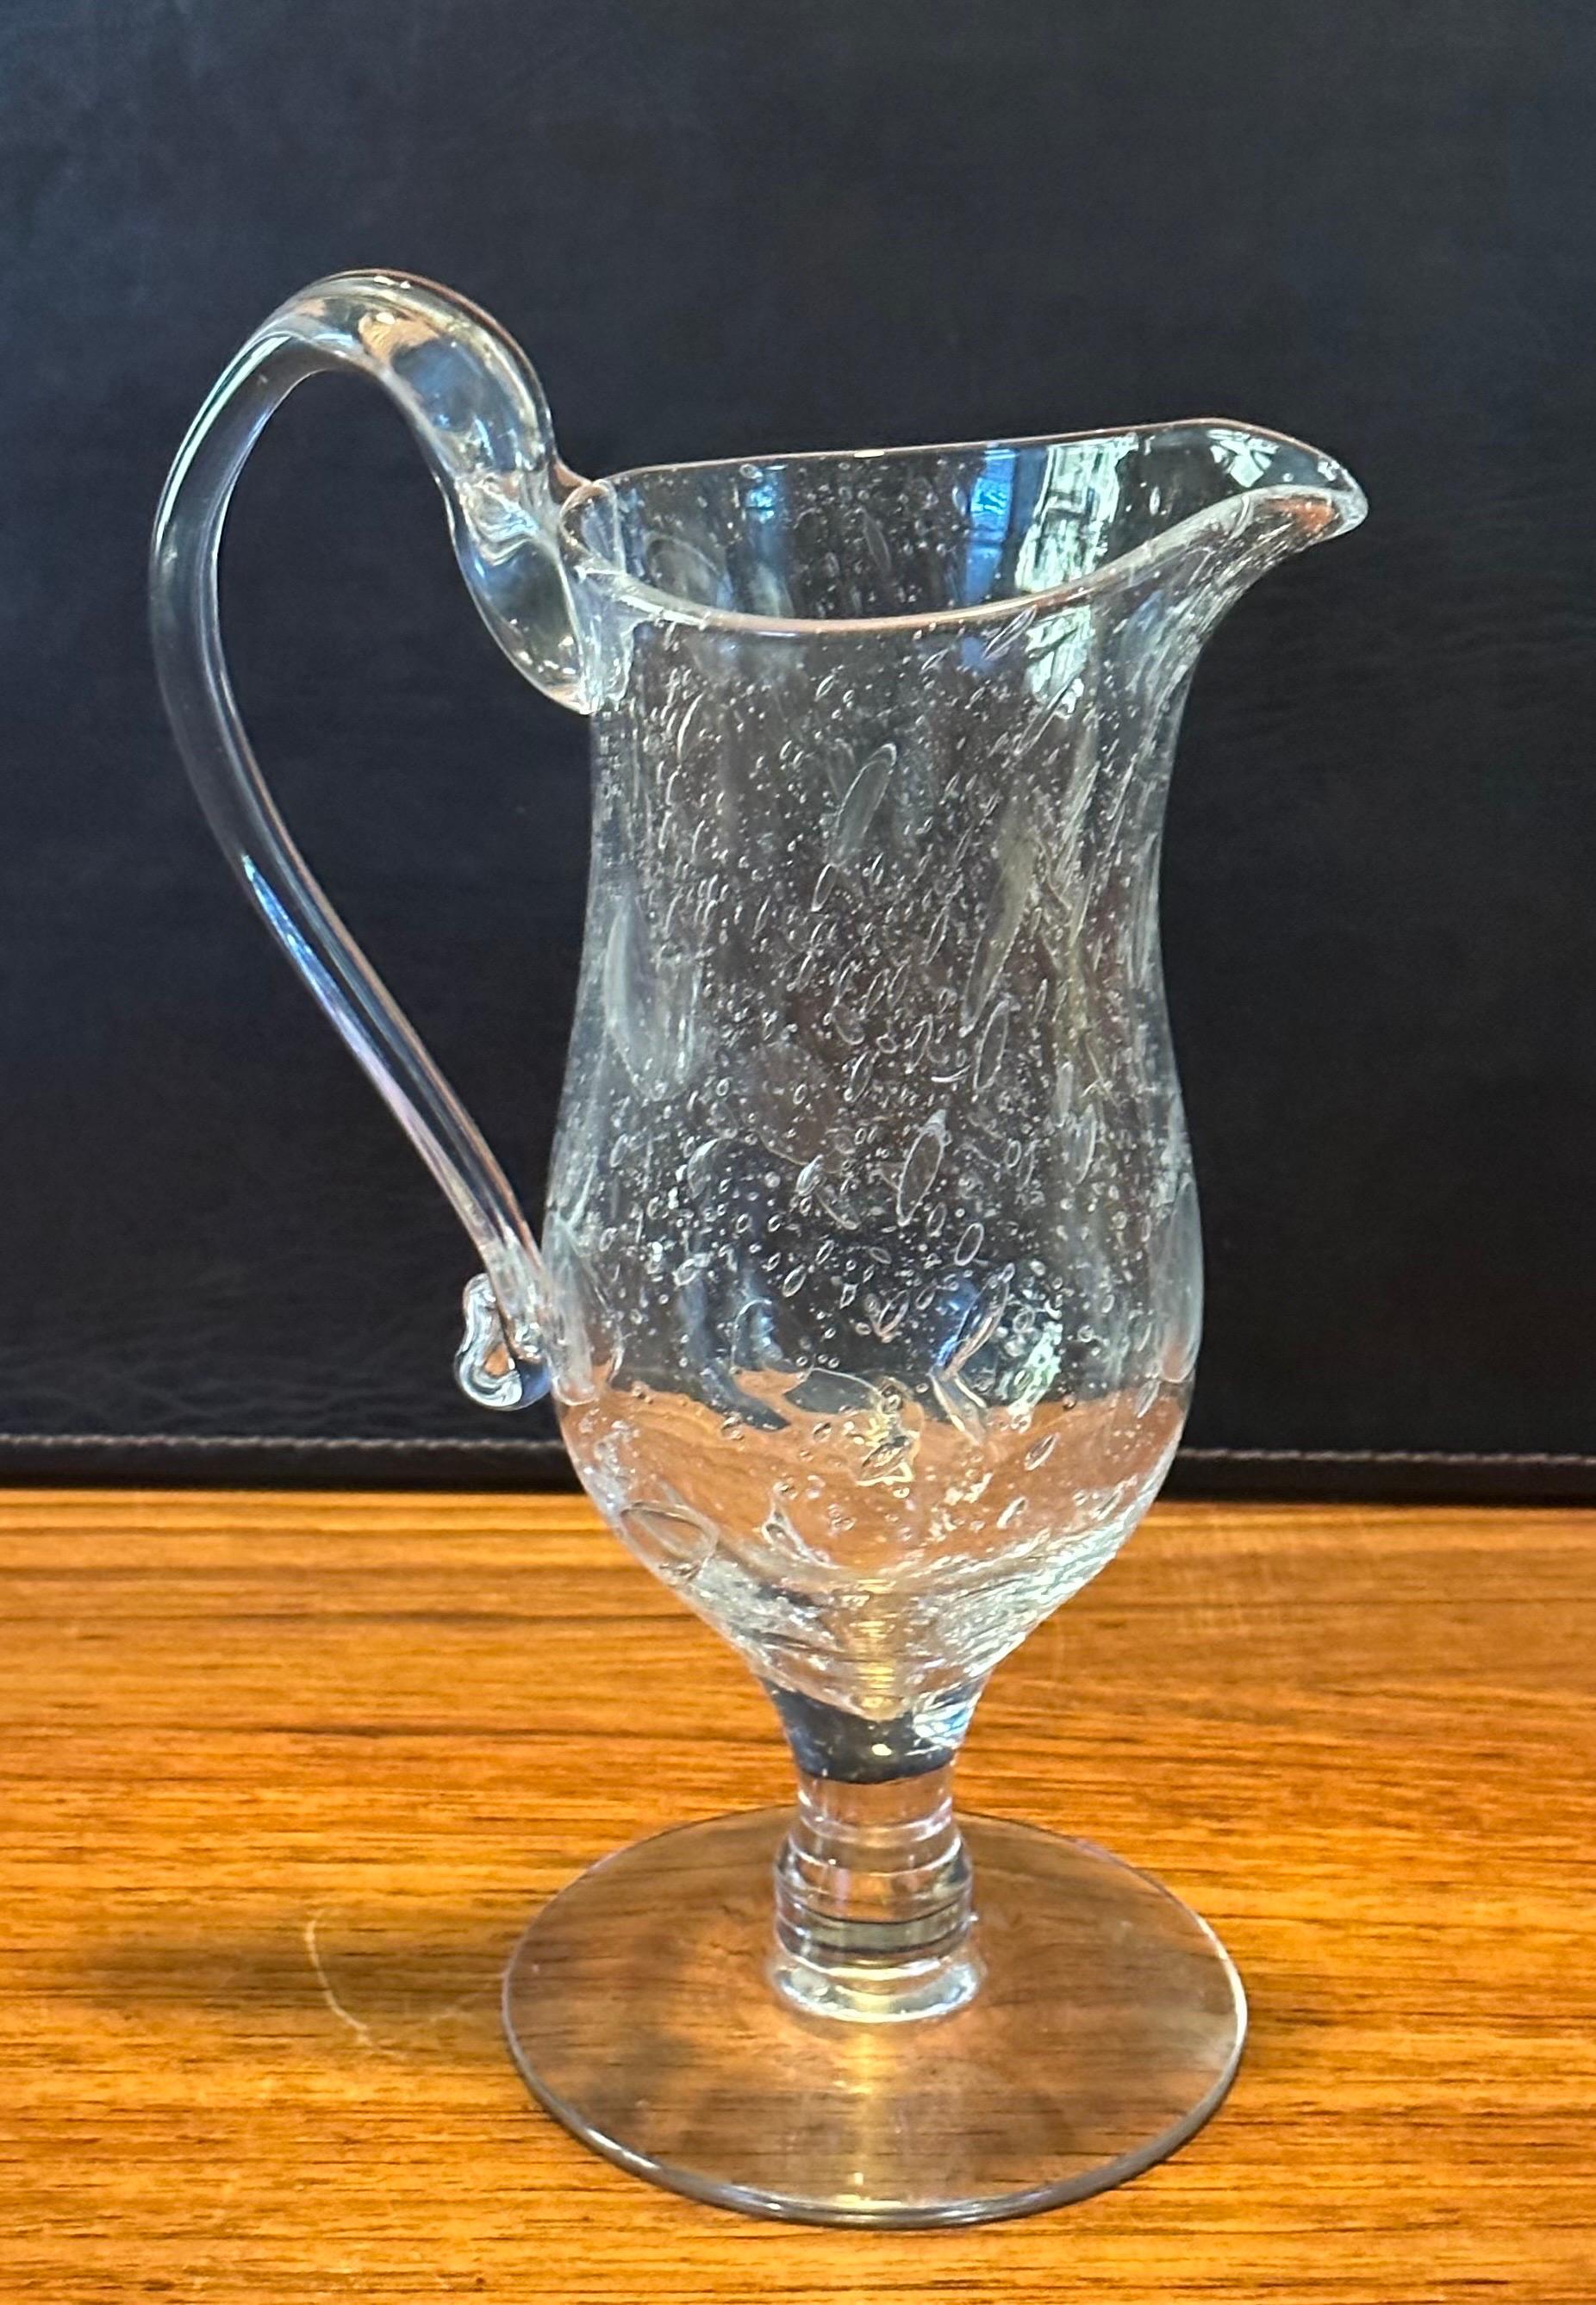 Hand blown crackled clear glass ewer / pitcher by Blenko Glass, circa 1990s. The piece is in very good vintage condition and measures 7